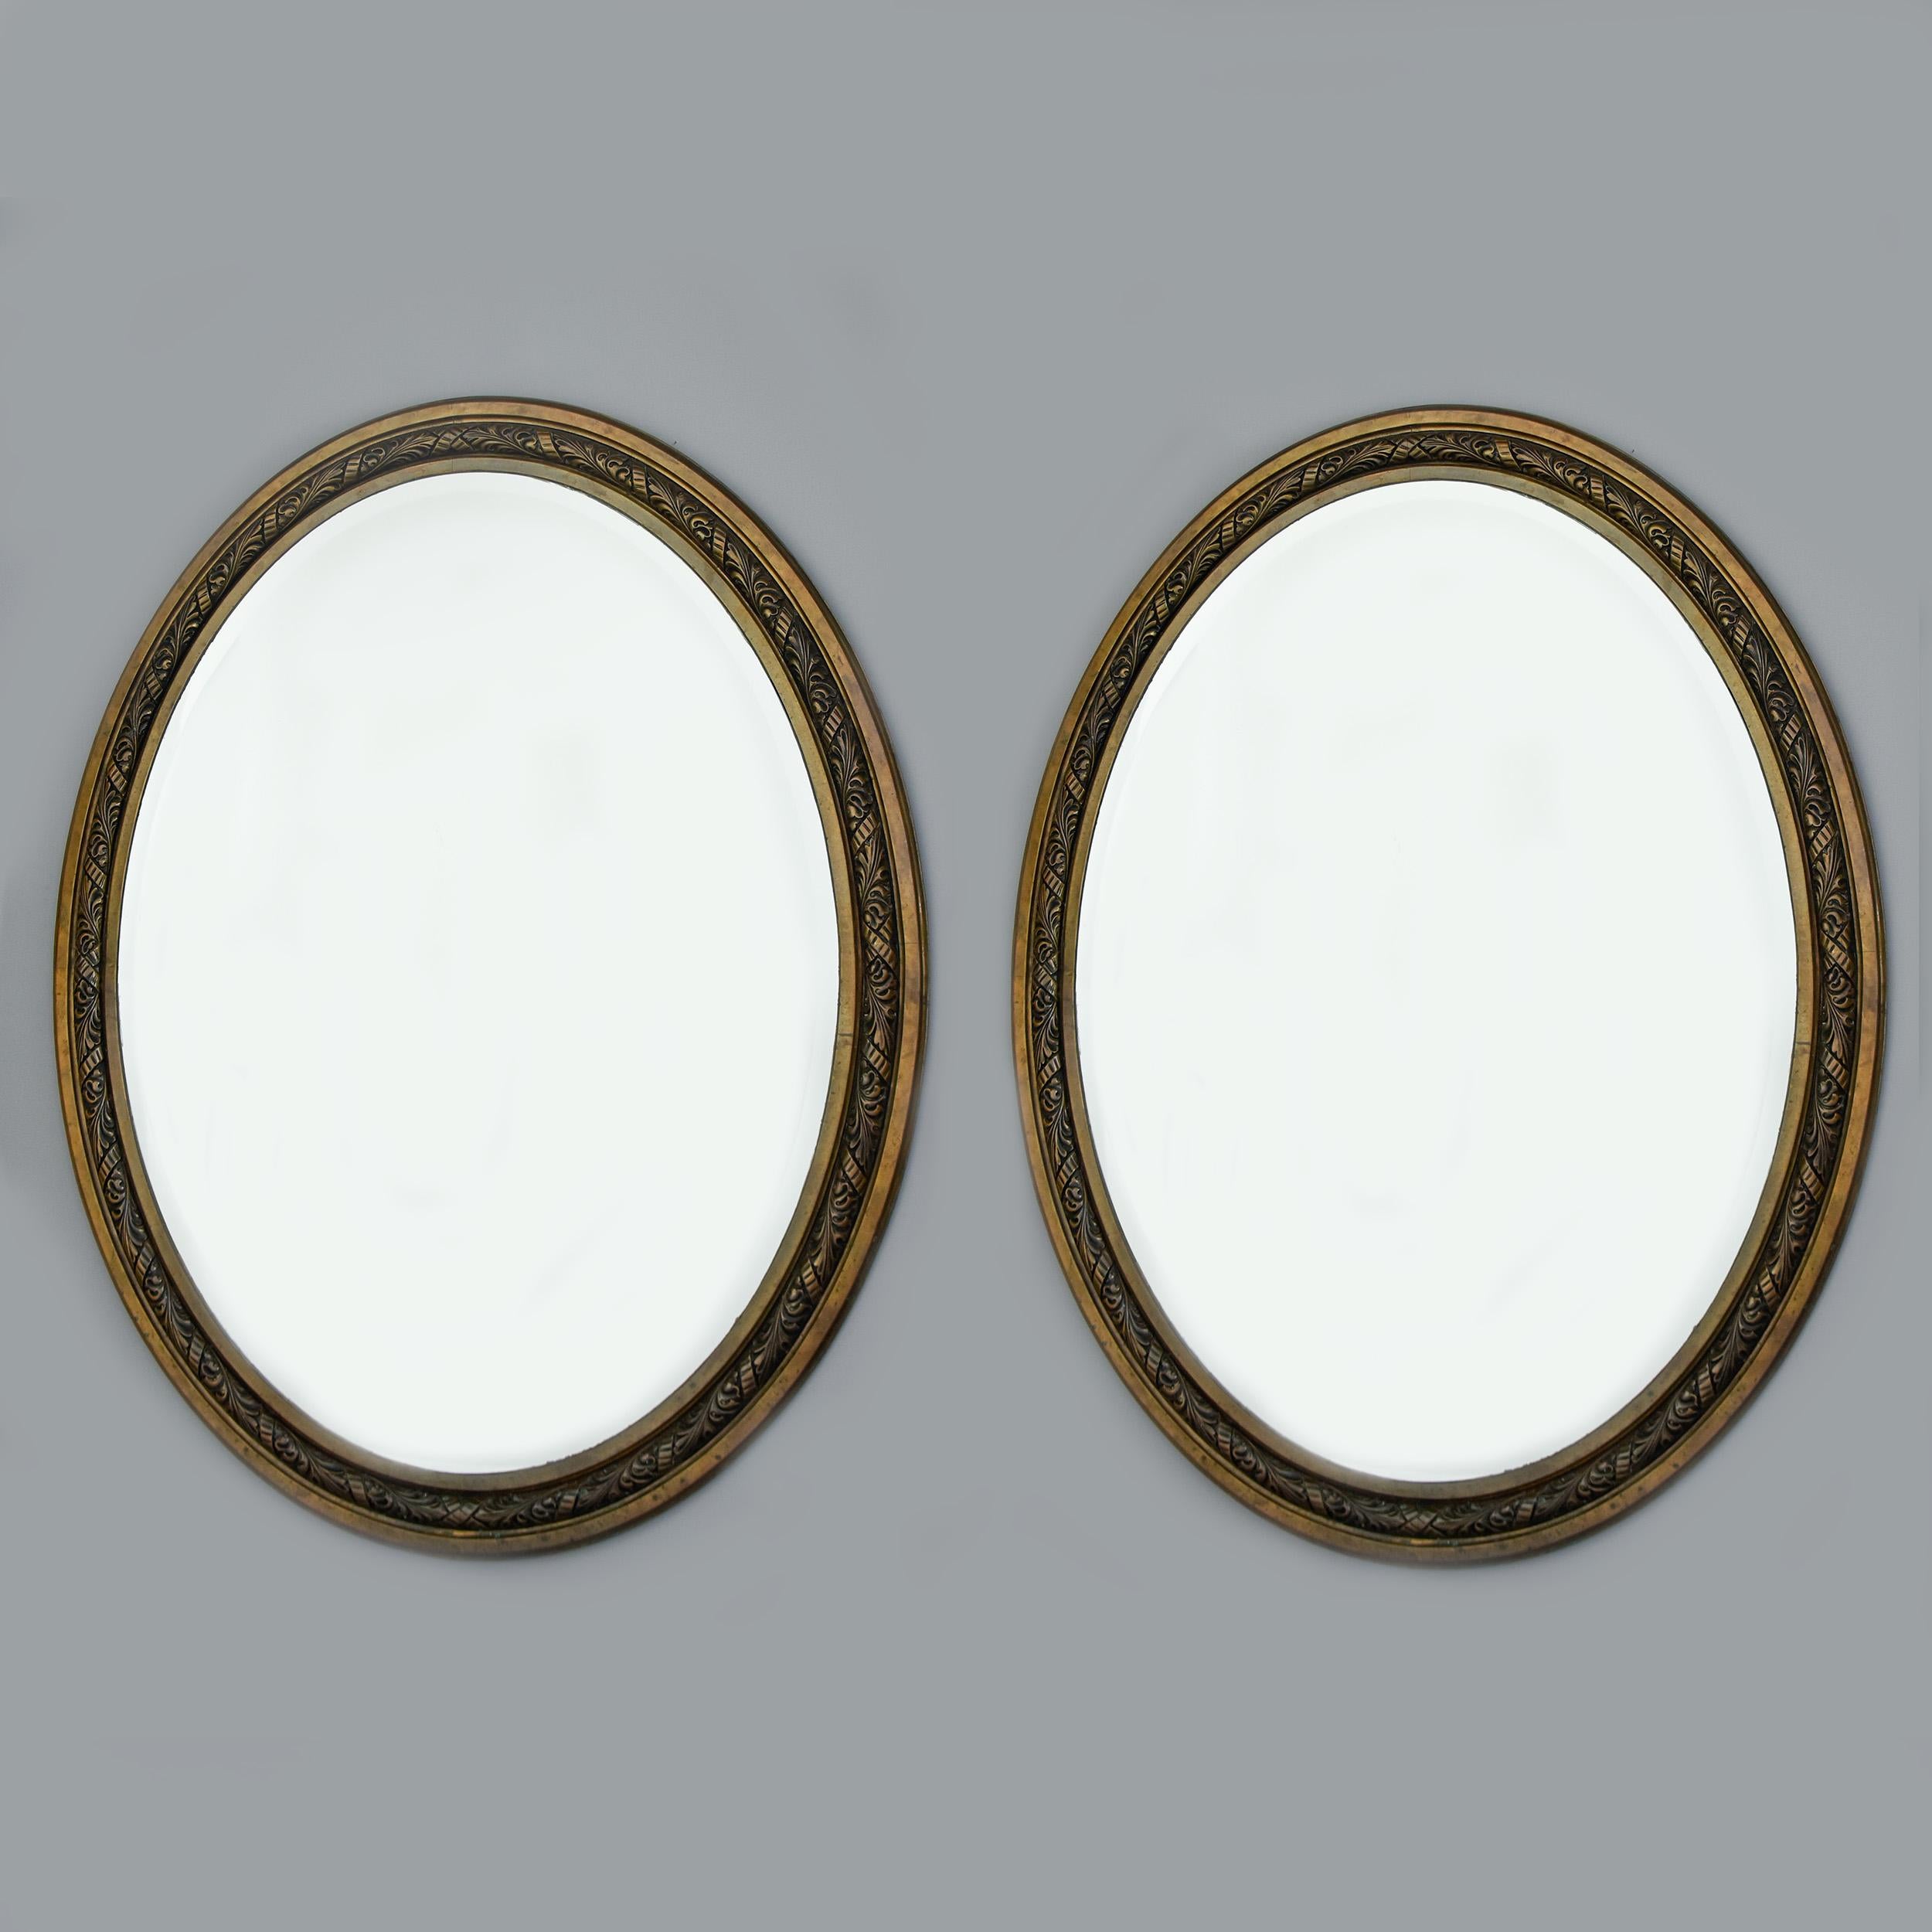 Large pair of Art Nouveau French oval mirrors in bronze frames that date from approximately 1910. Frames are 57” high and 45” wide with actual mirrors measuring 49” high X 36.5” wide. Mirrors have beveled outer edge. Cast bronze frames have patina